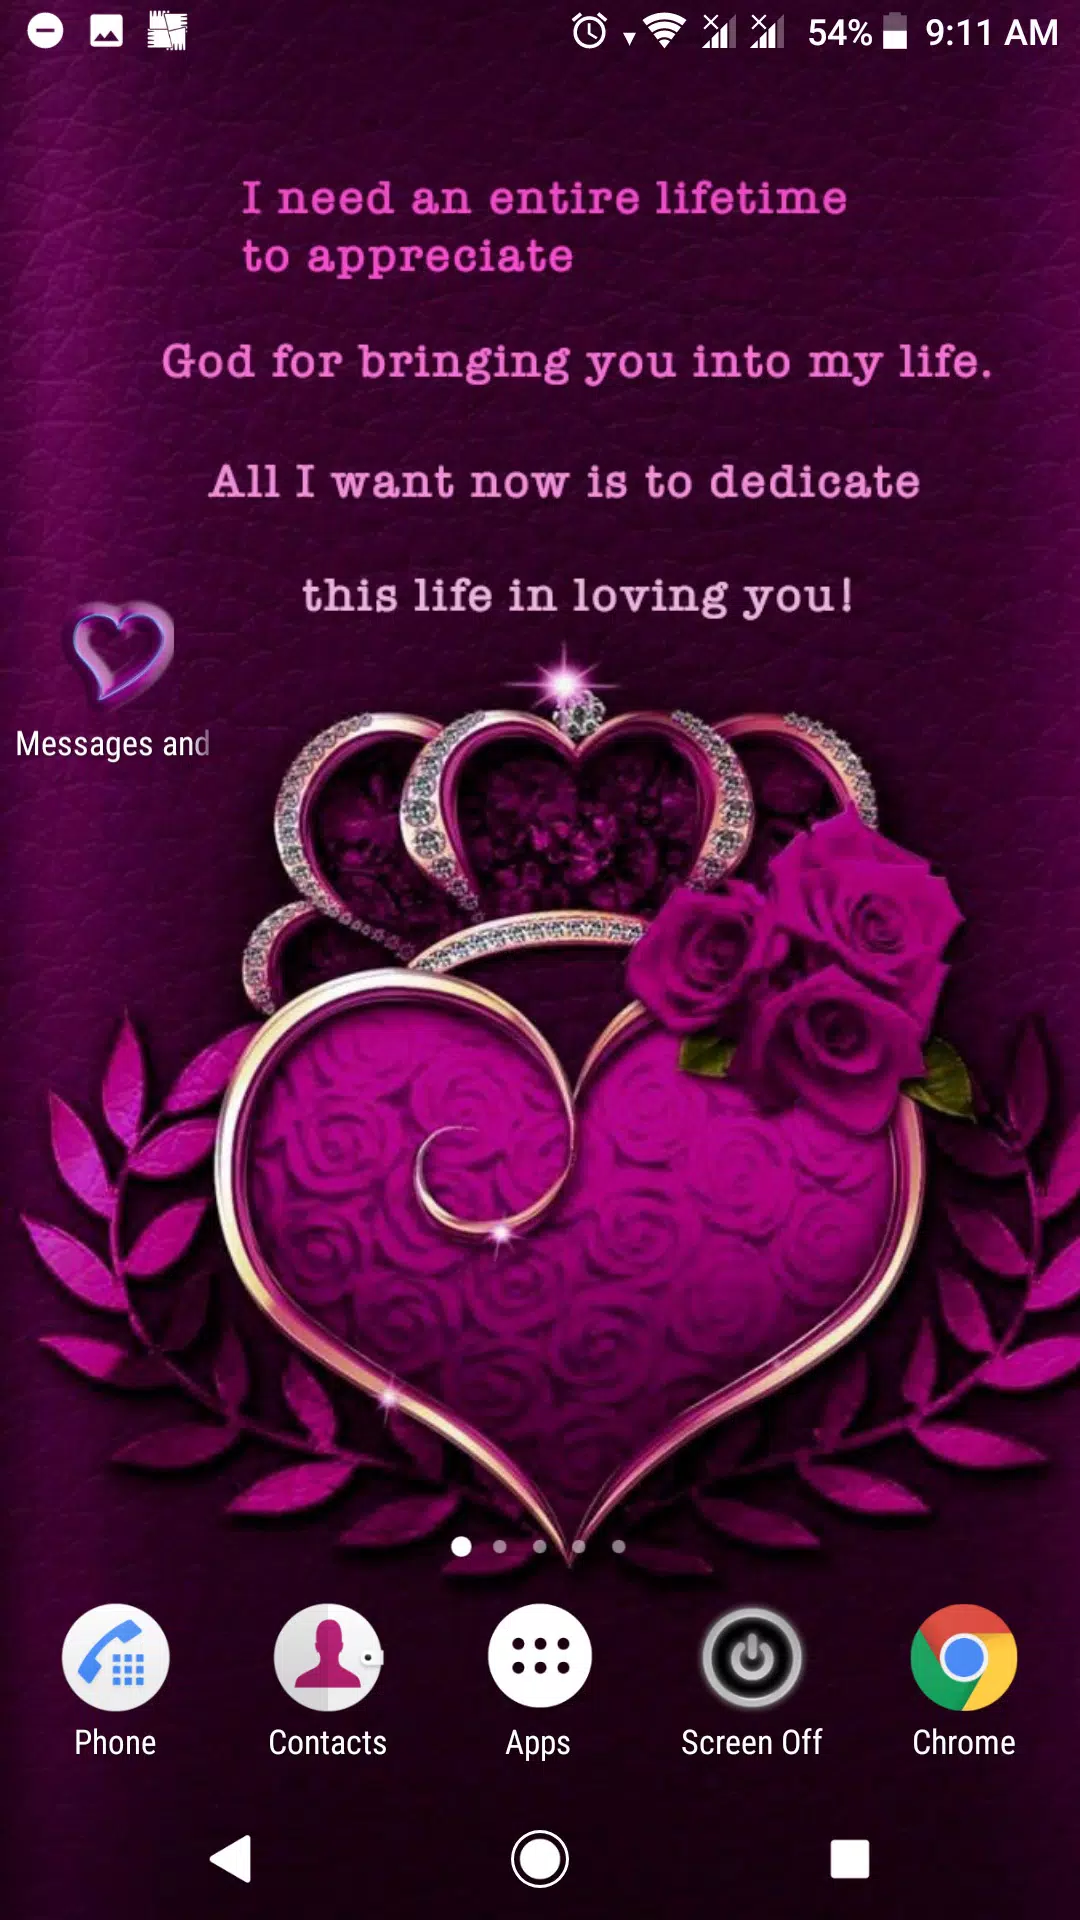 Messages and Love wallpaper APK for Android Download